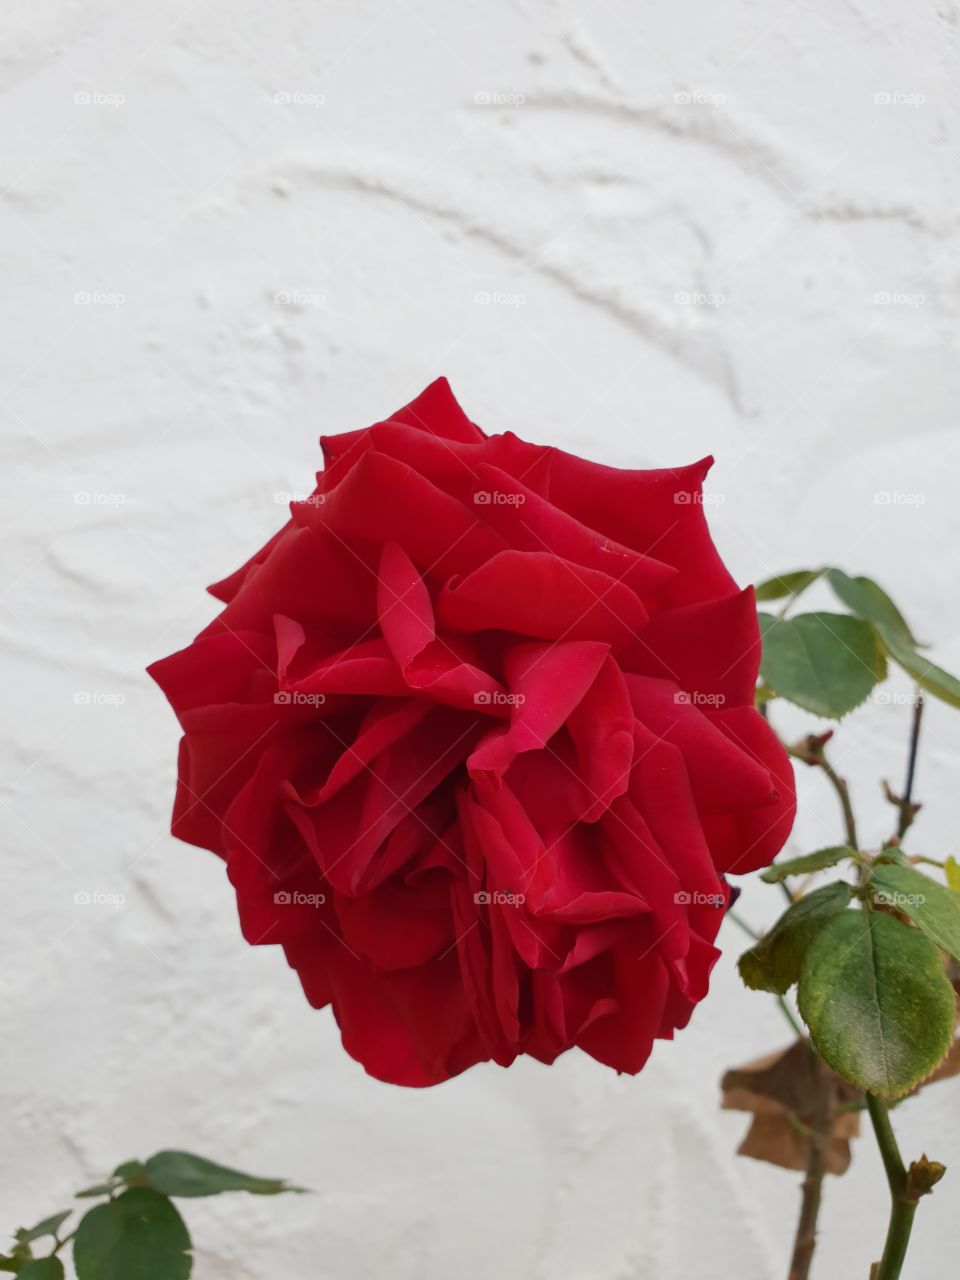 A single red rose against a white wall in Spain